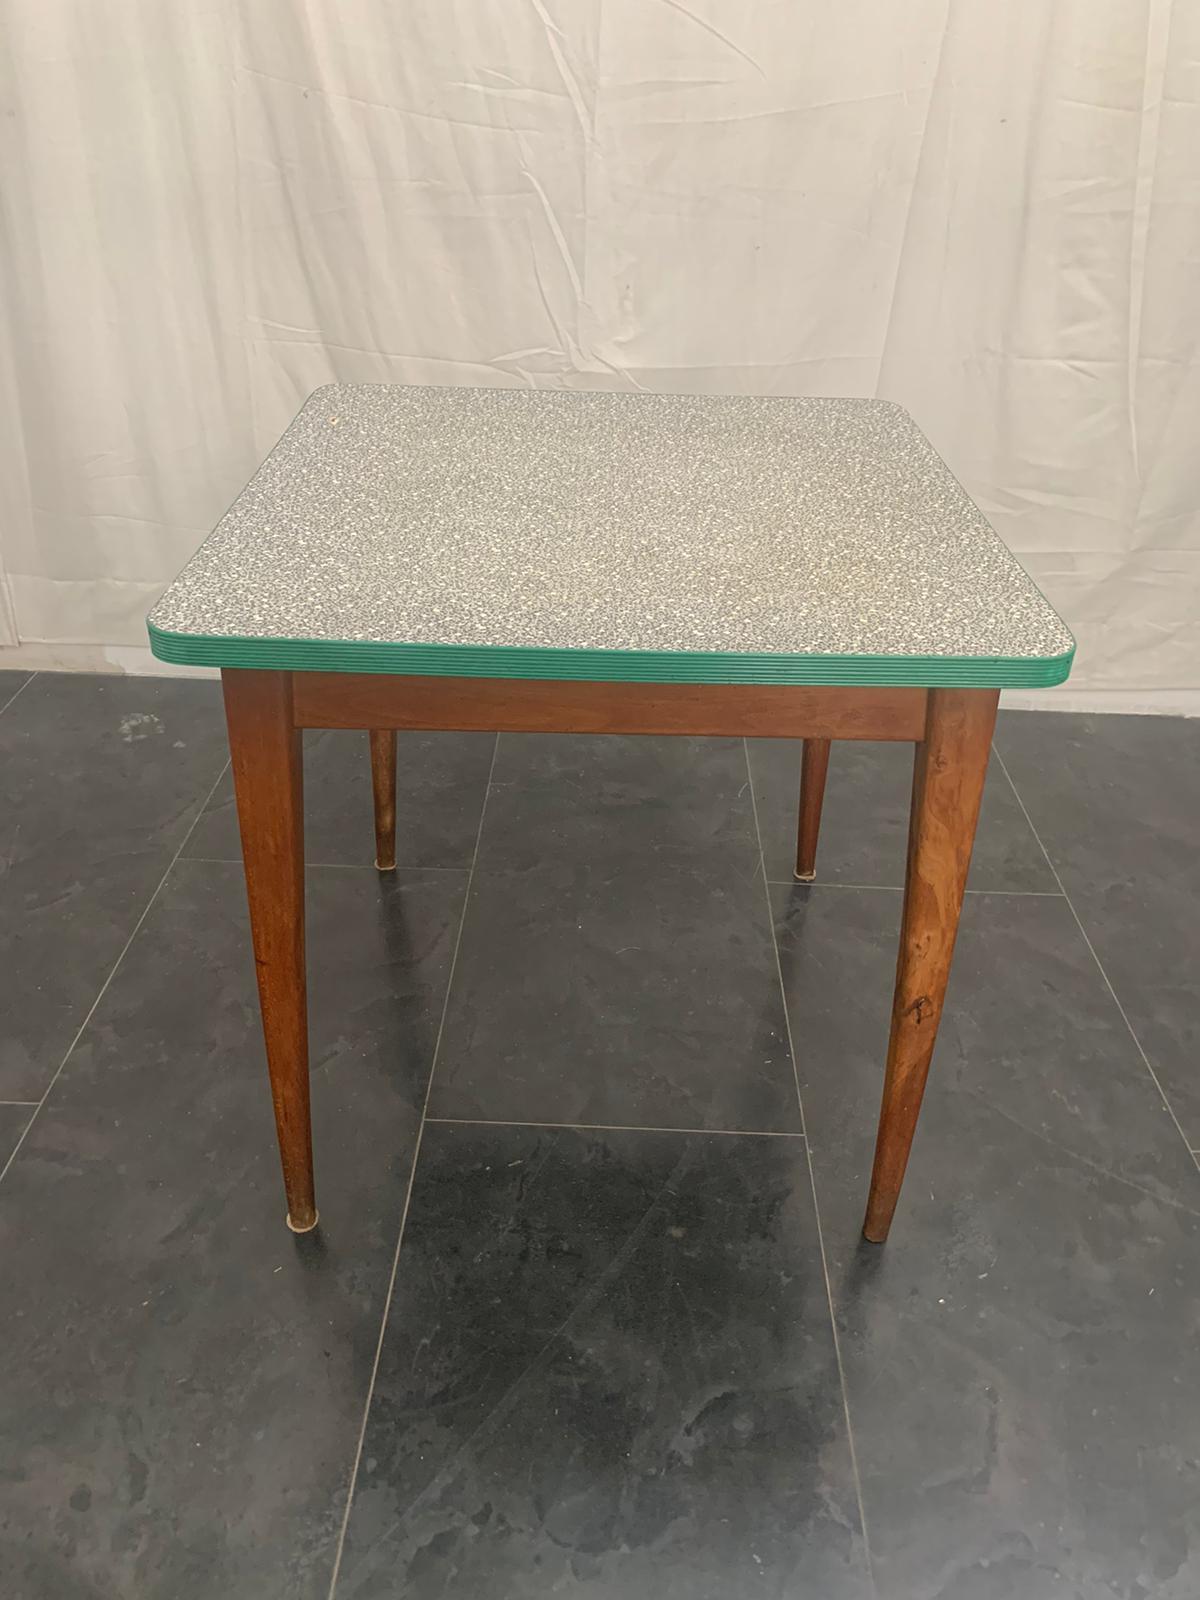 Table from the 1950s in cherry wood with top in laminate weave mosaic edged in plastic profile green color.